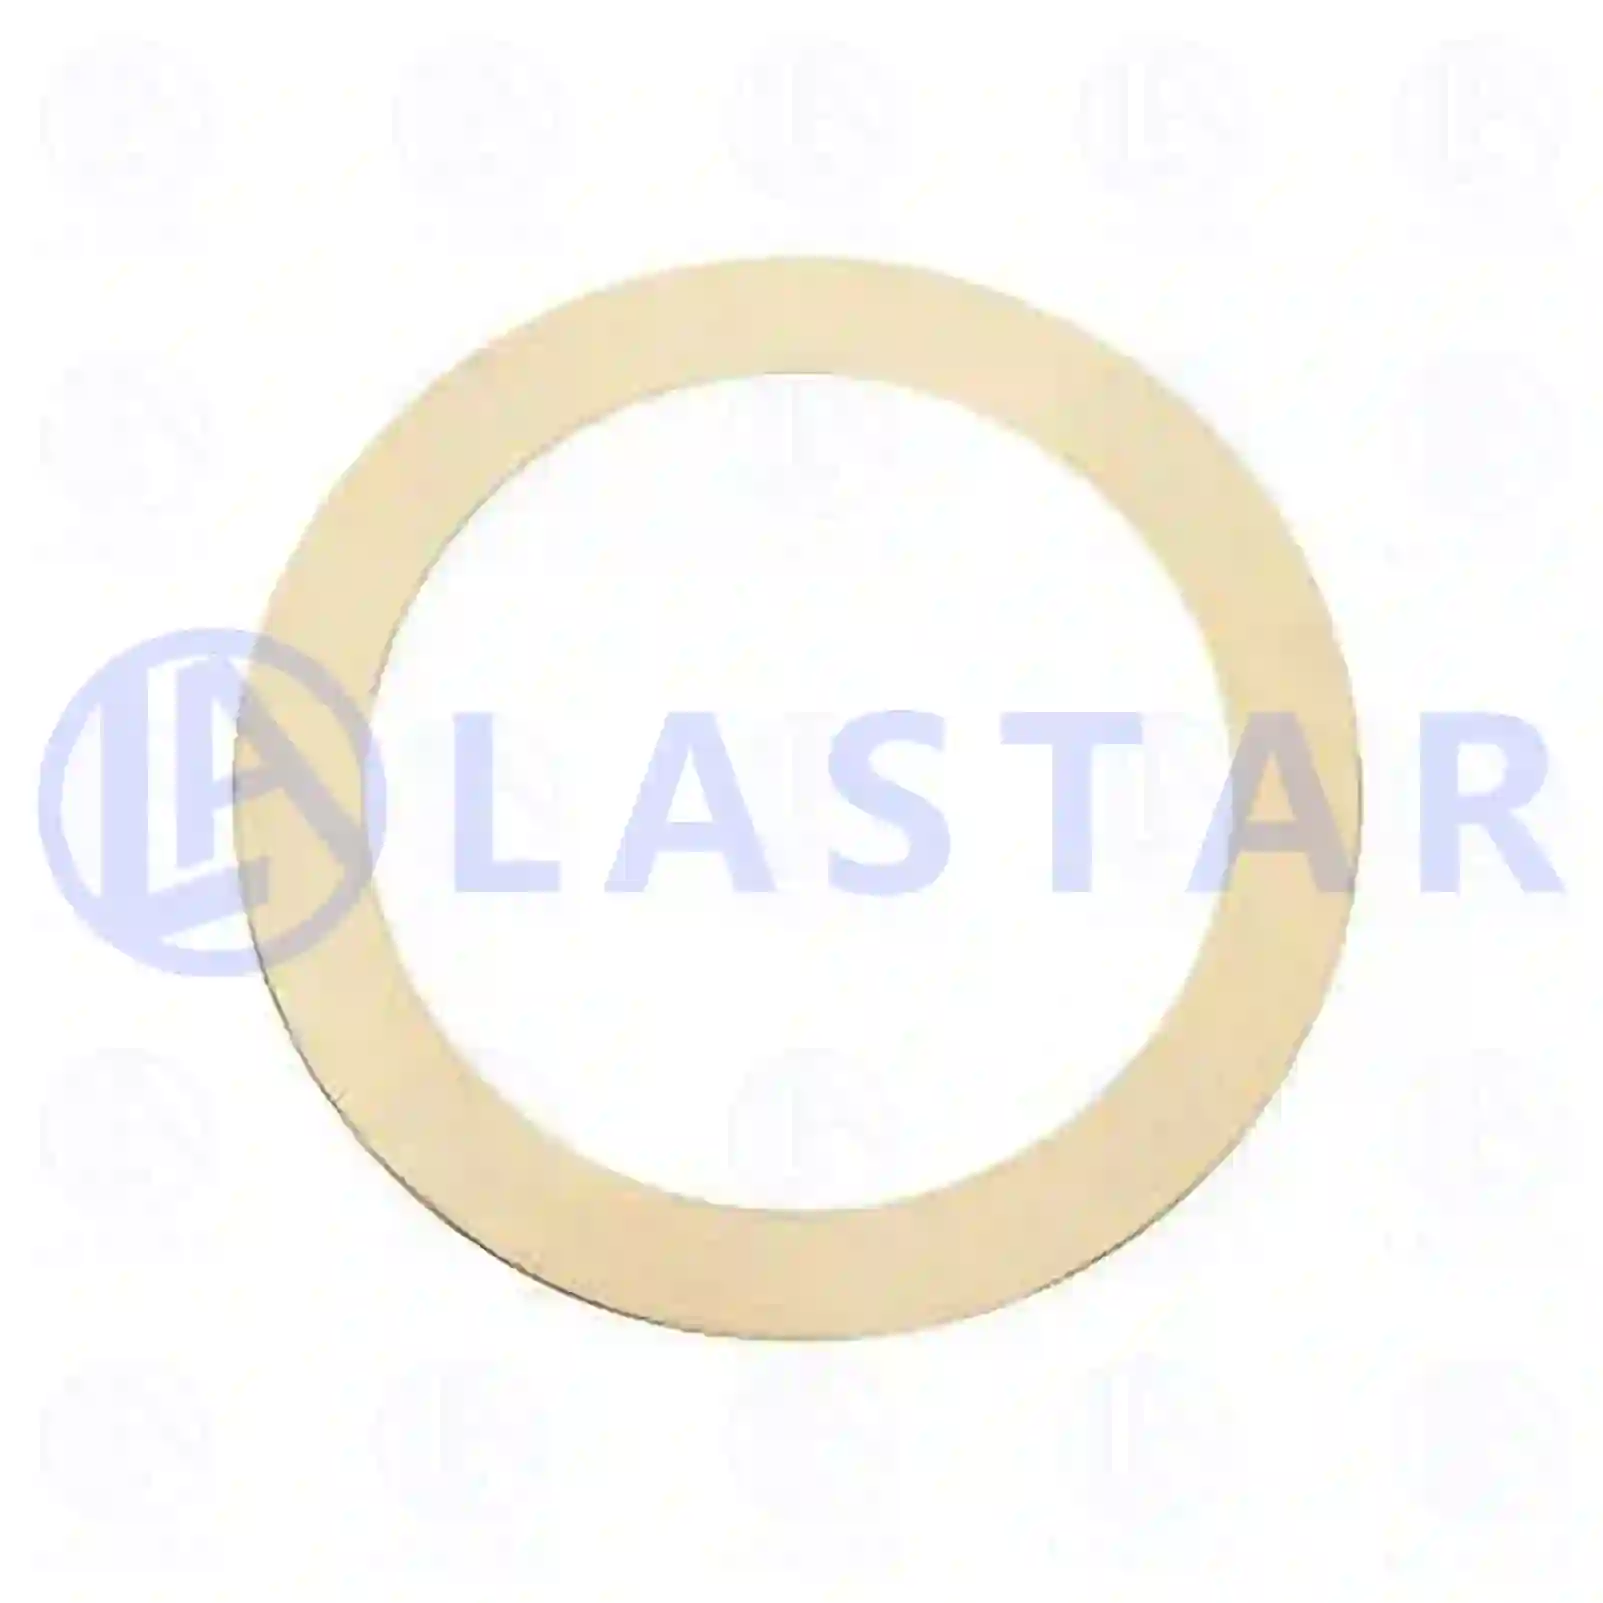 Washer, 77726044, 329347 ||  77726044 Lastar Spare Part | Truck Spare Parts, Auotomotive Spare Parts Washer, 77726044, 329347 ||  77726044 Lastar Spare Part | Truck Spare Parts, Auotomotive Spare Parts